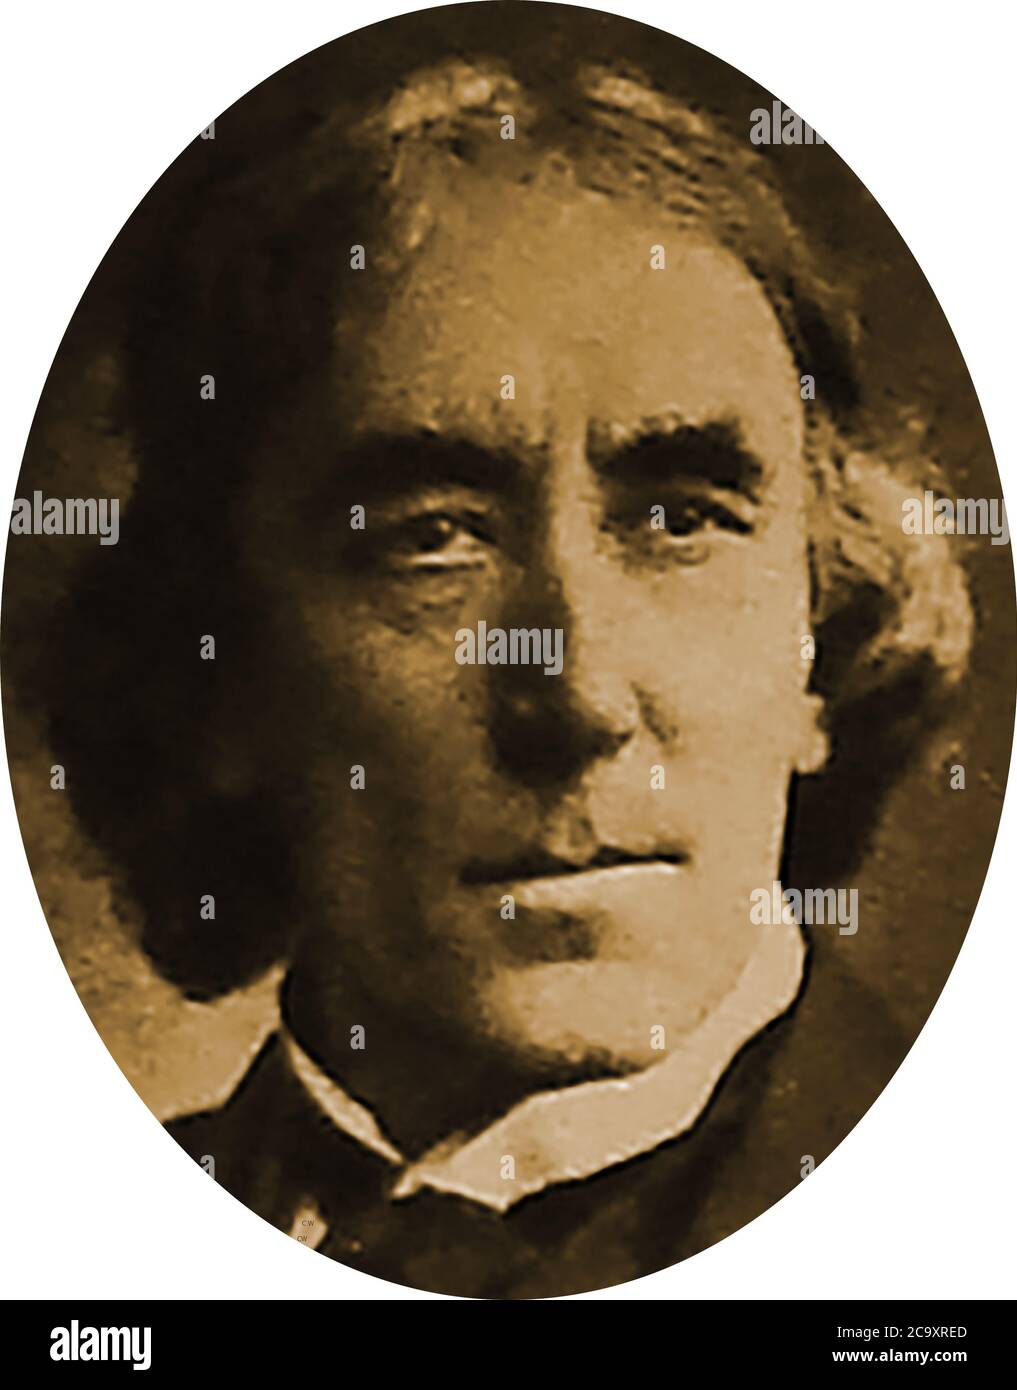 Portrait of Somerset born British actor, actor/manager and  theatrical manager Sir Henry Irving (1883-1905). He was also known as John Henry Brodribb, (his birth name) and   J. H. Irving. In 1895 he became the first actor to be awarded a knighthood. He is known for his close association with Bram Stoker, author of 'Dracula' and became a Freemason, being initiated into the Jerusalem Lodge No 197 (London). His ashes were buried in Westminster Abbey Stock Photo